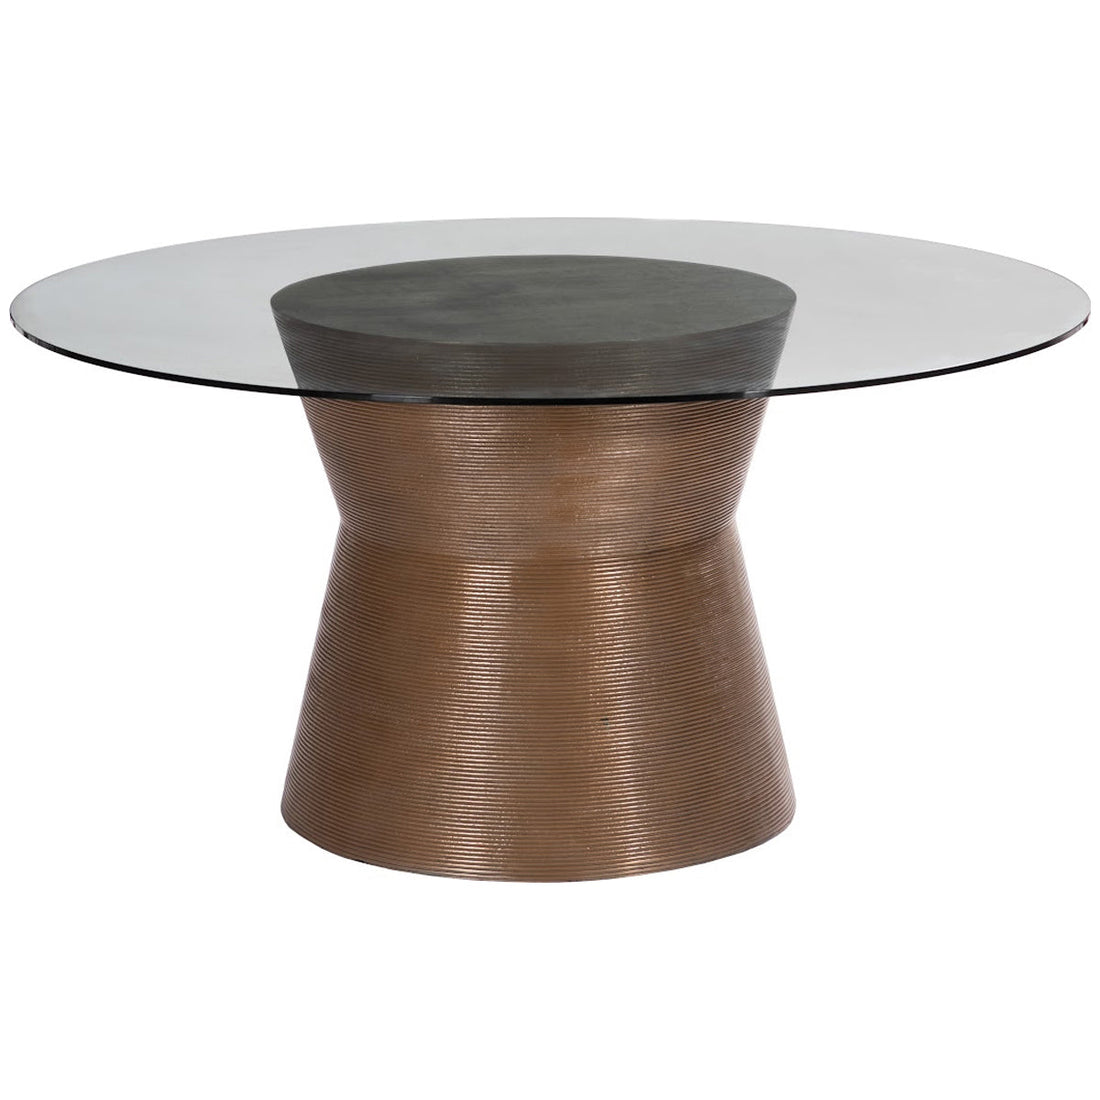 Phillips Collection Kono Outdoor Dining Table